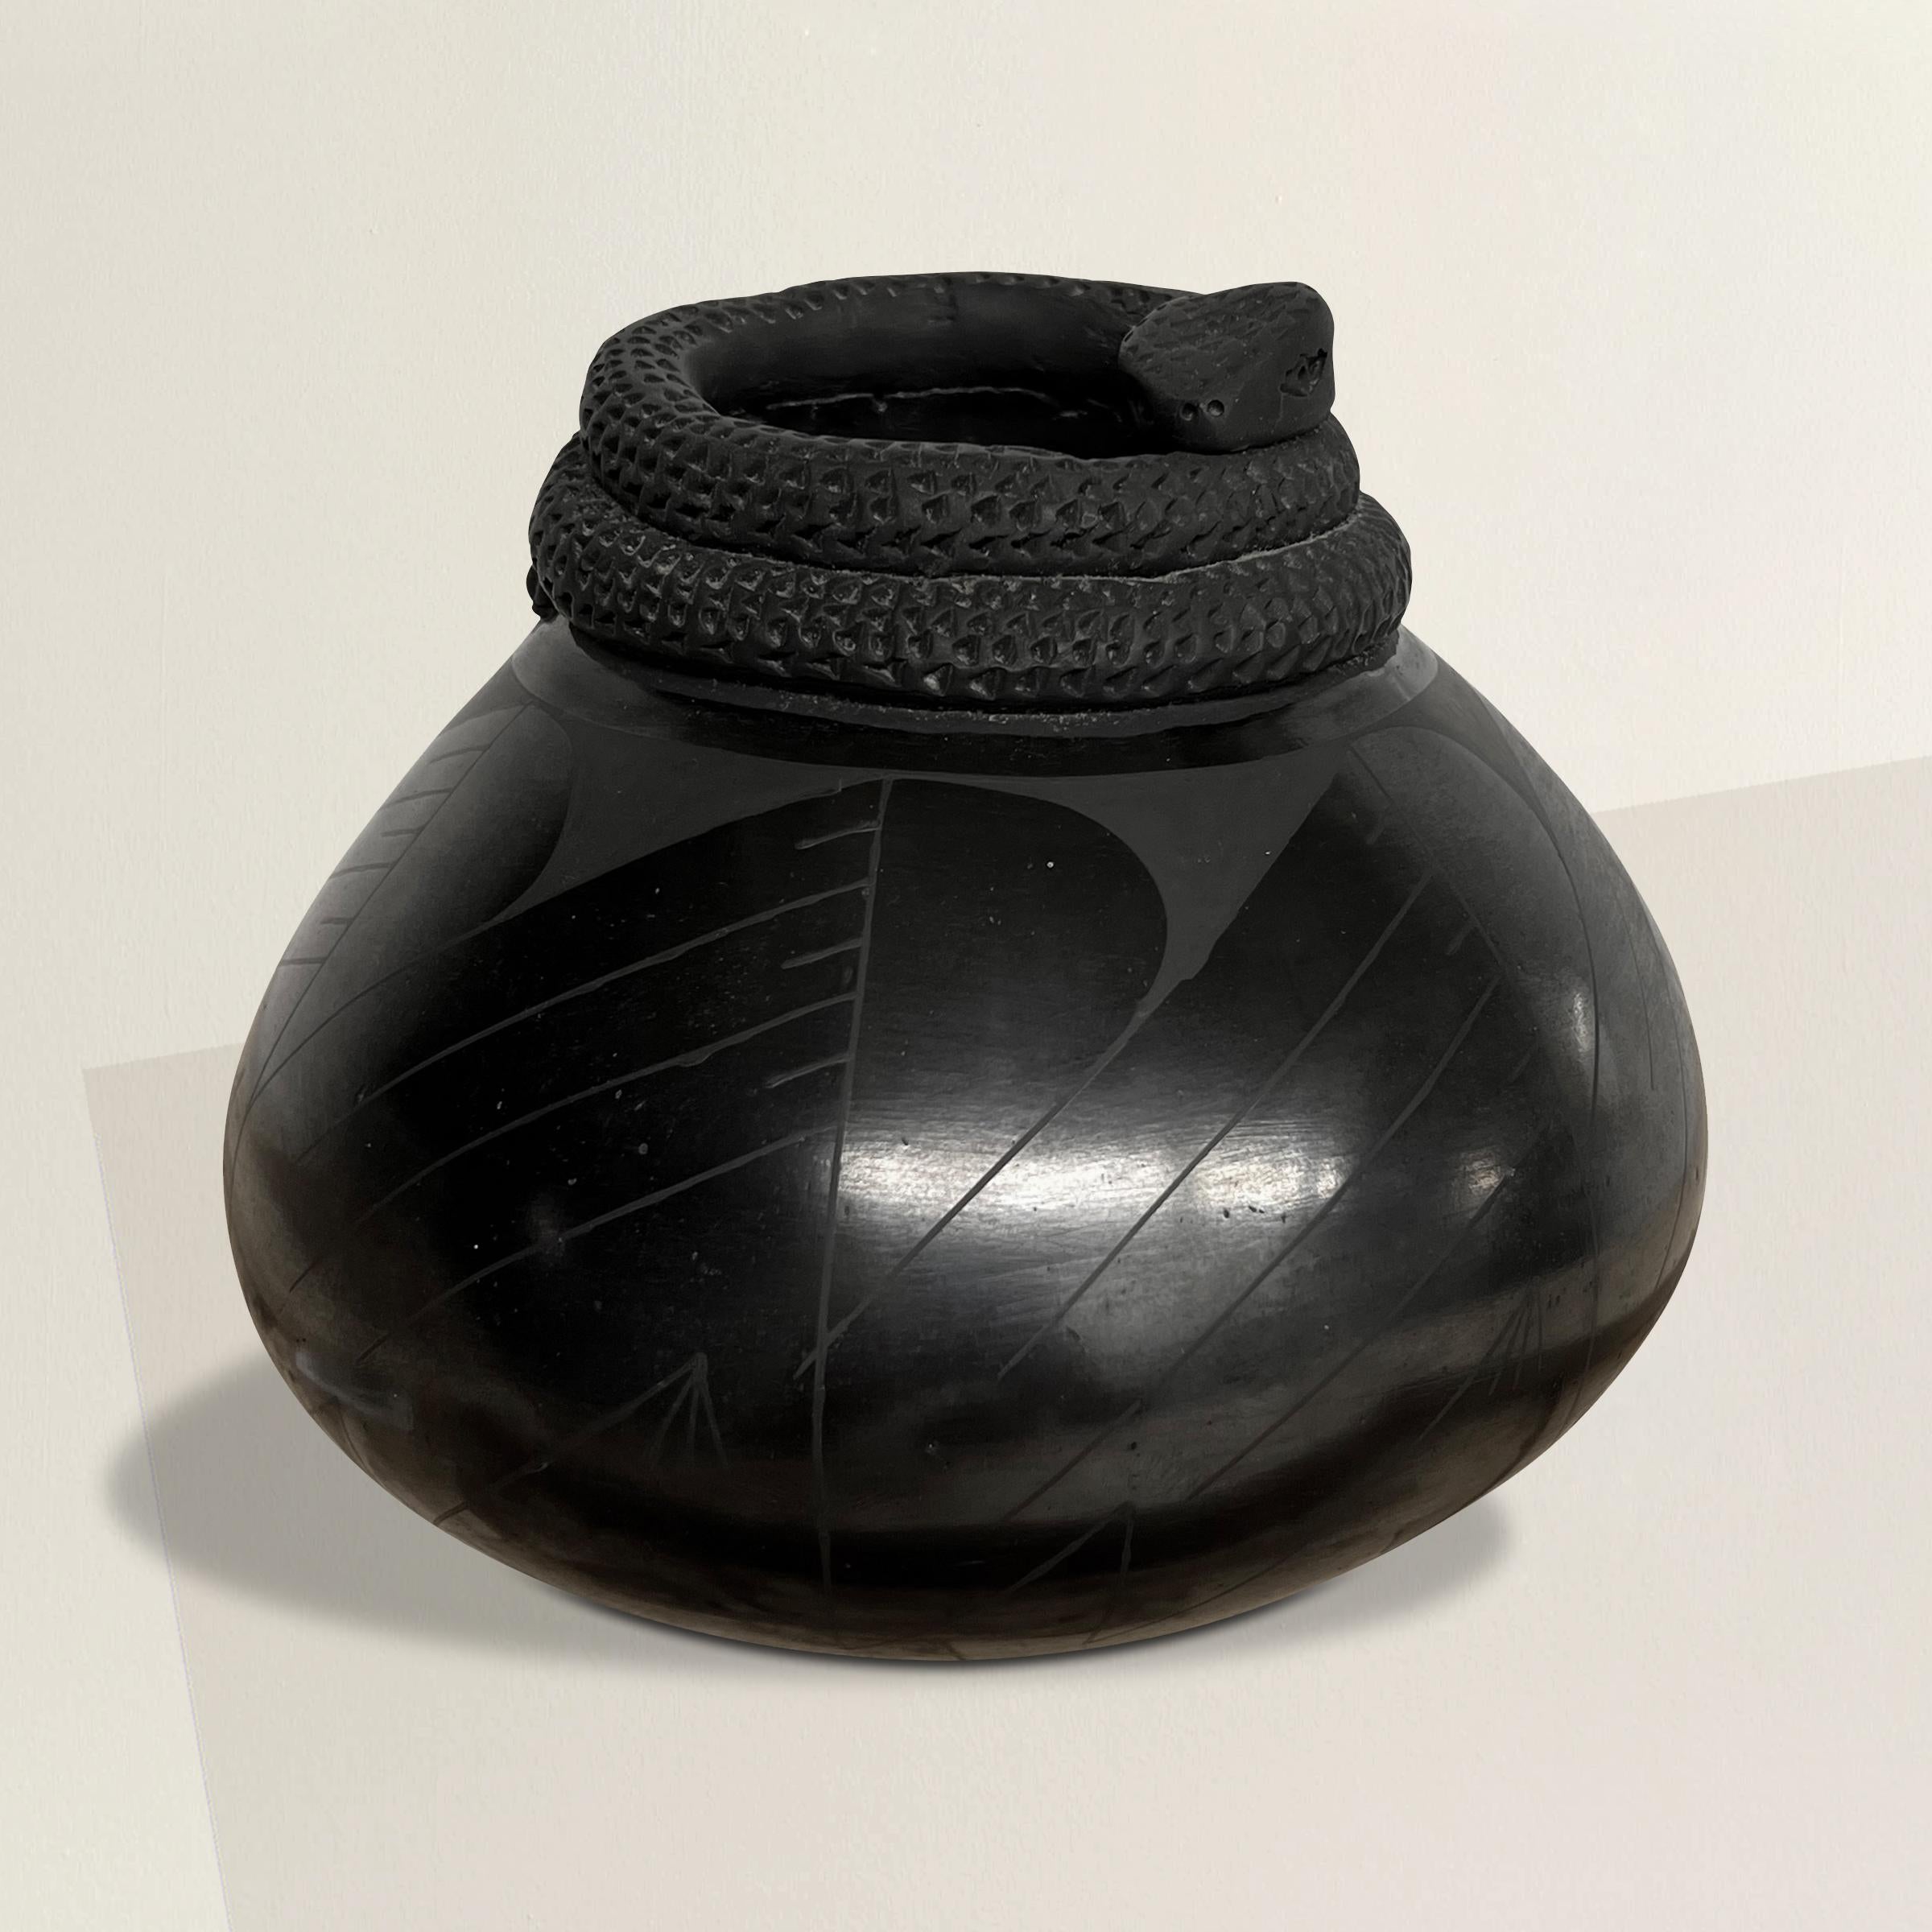 A chic and sinister Mata Ortiz ceramic pot with the most wonderful coiled snake effigy surrounding the lip and a beautiful burnished finish.